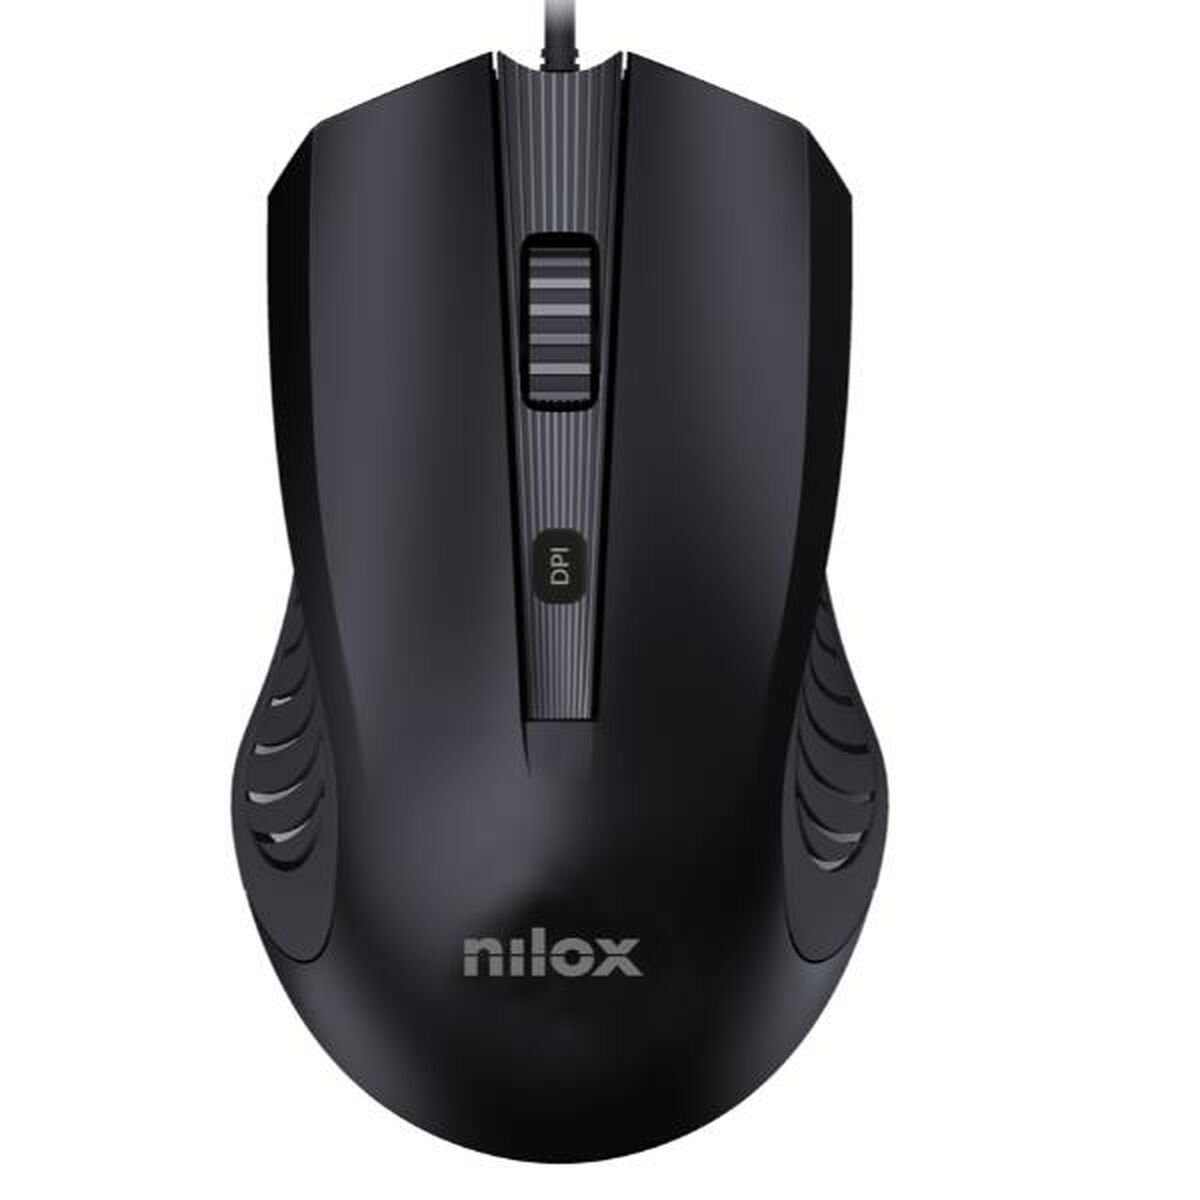 Mouse Nilox MOUSB1013 Black, Nilox, Computing, Accessories, mouse-nilox-mousb1013-black, Brand_Nilox, category-reference-2609, category-reference-2642, category-reference-2656, category-reference-t-19685, category-reference-t-19908, category-reference-t-21353, category-reference-t-25626, computers / peripherals, Condition_NEW, office, Price_20 - 50, Teleworking, RiotNook